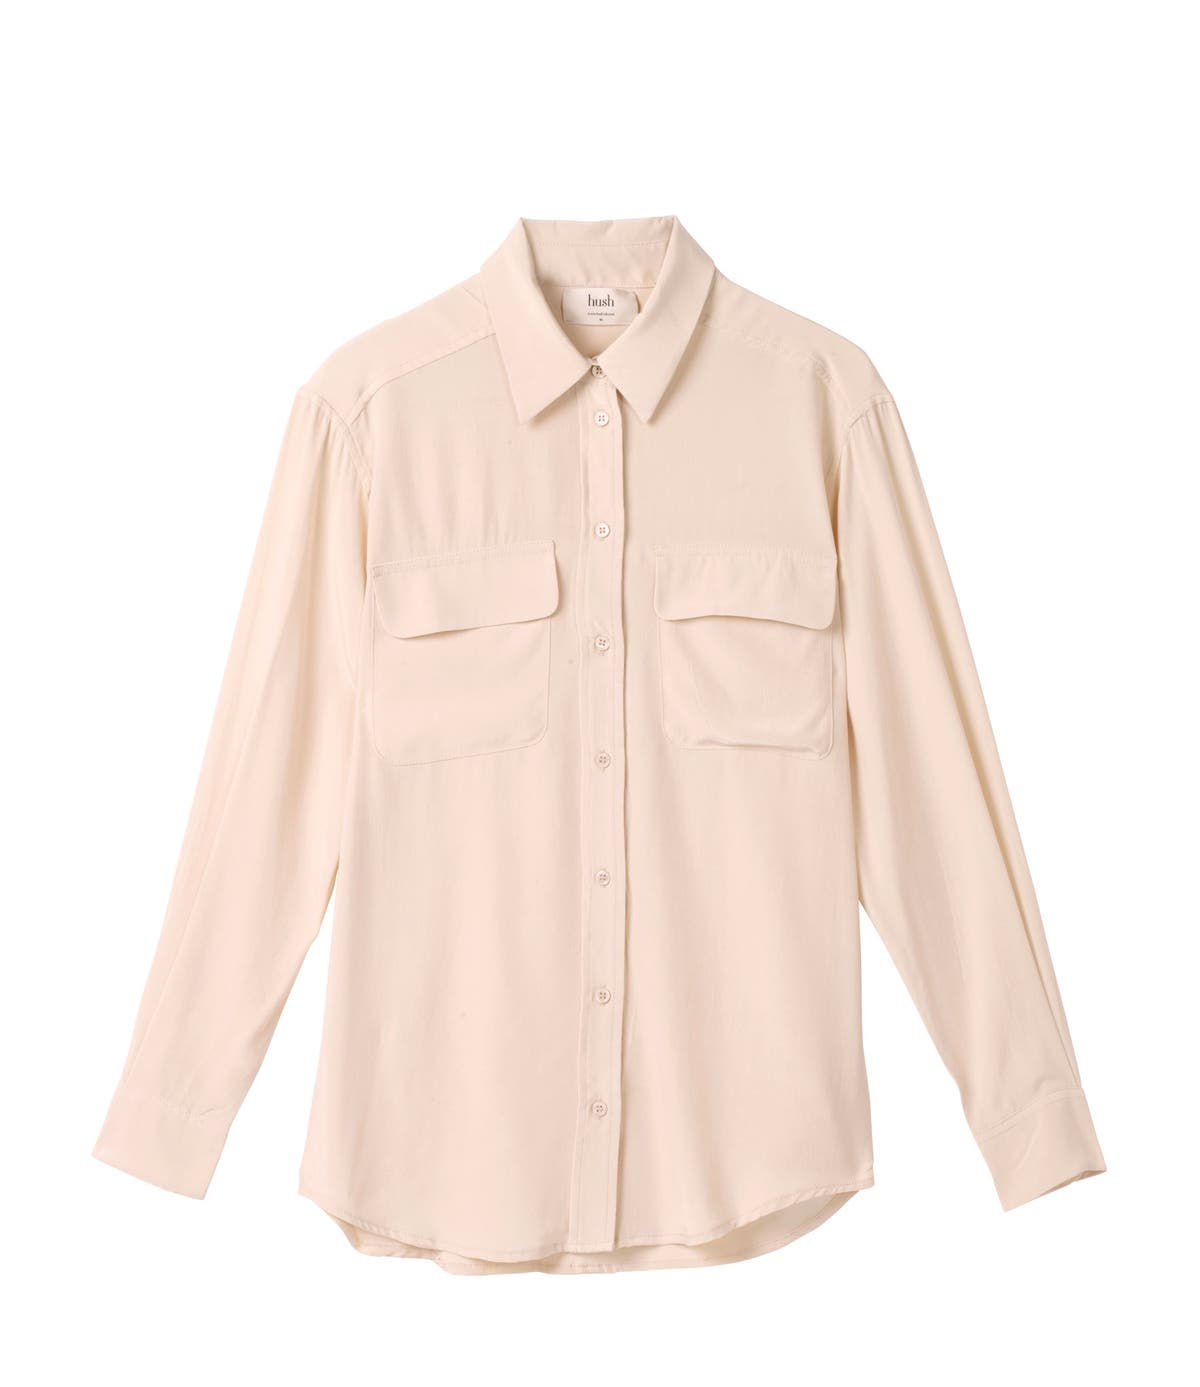 How to get the look: Silk shirts | The Independent | The Independent